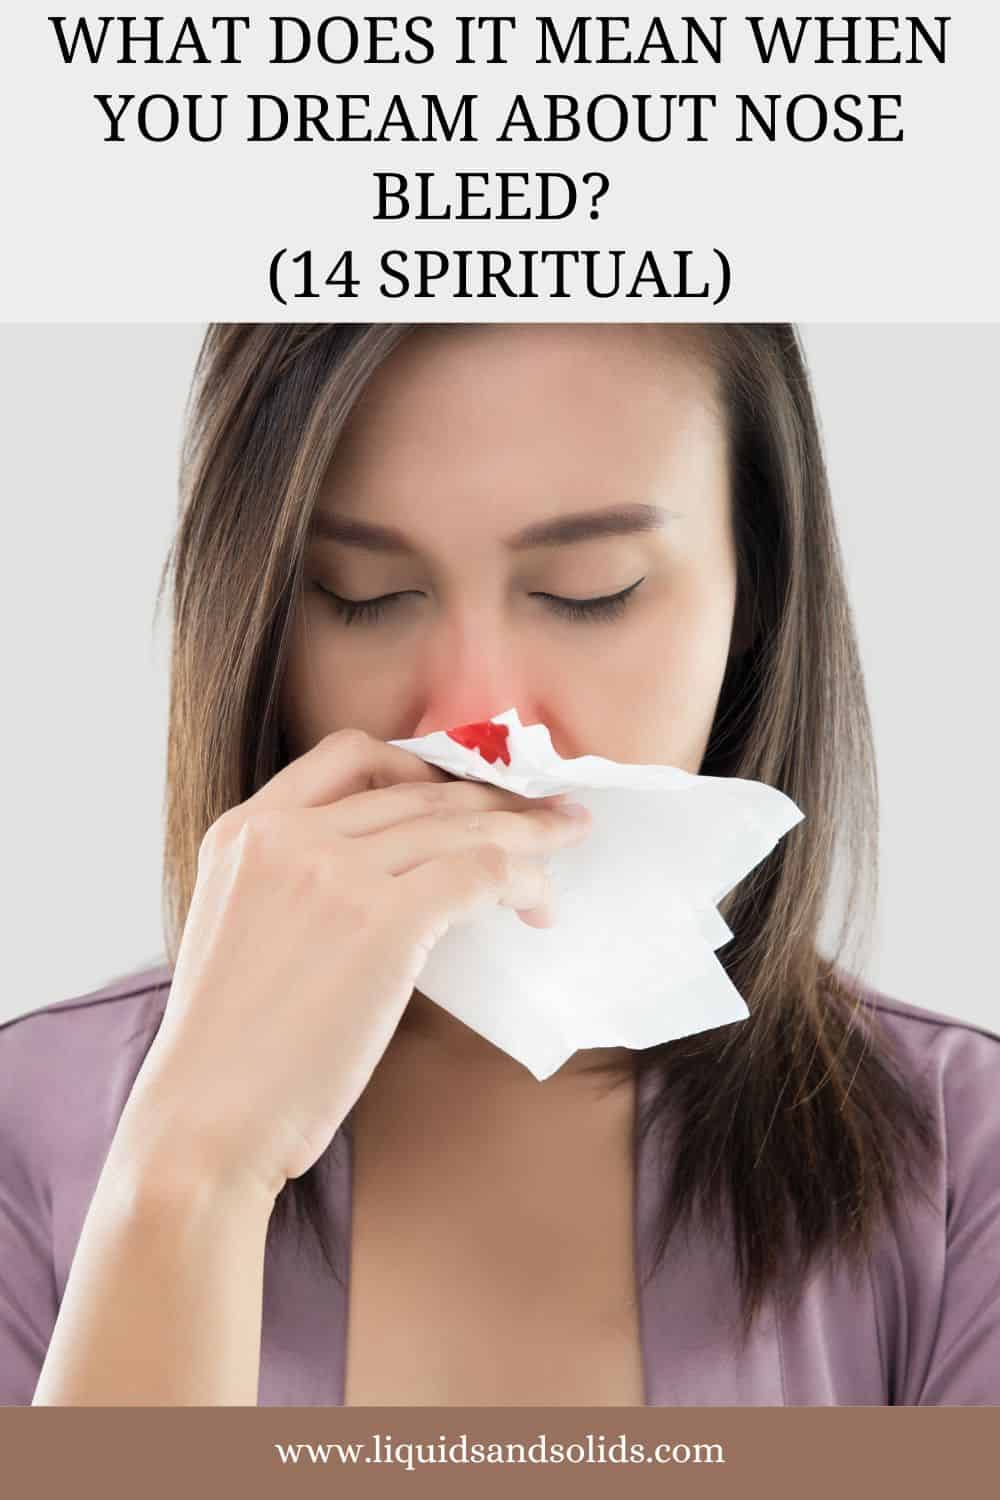 What Does It Mean When You Dream About Nose Bleed? (14 Spiritual)